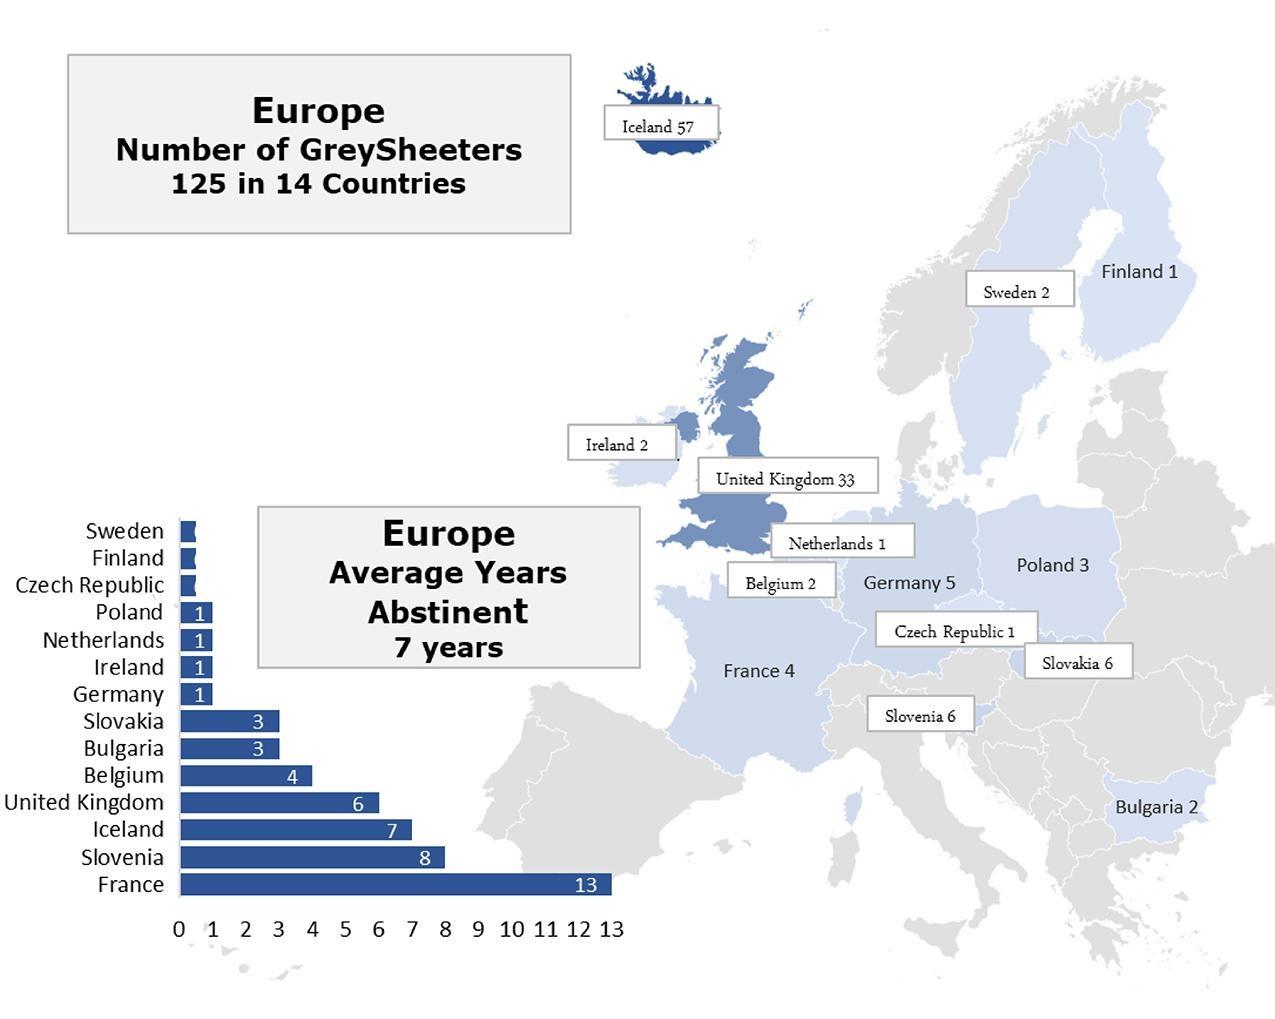 Map showing the number of GreySheeters in 14 European countries